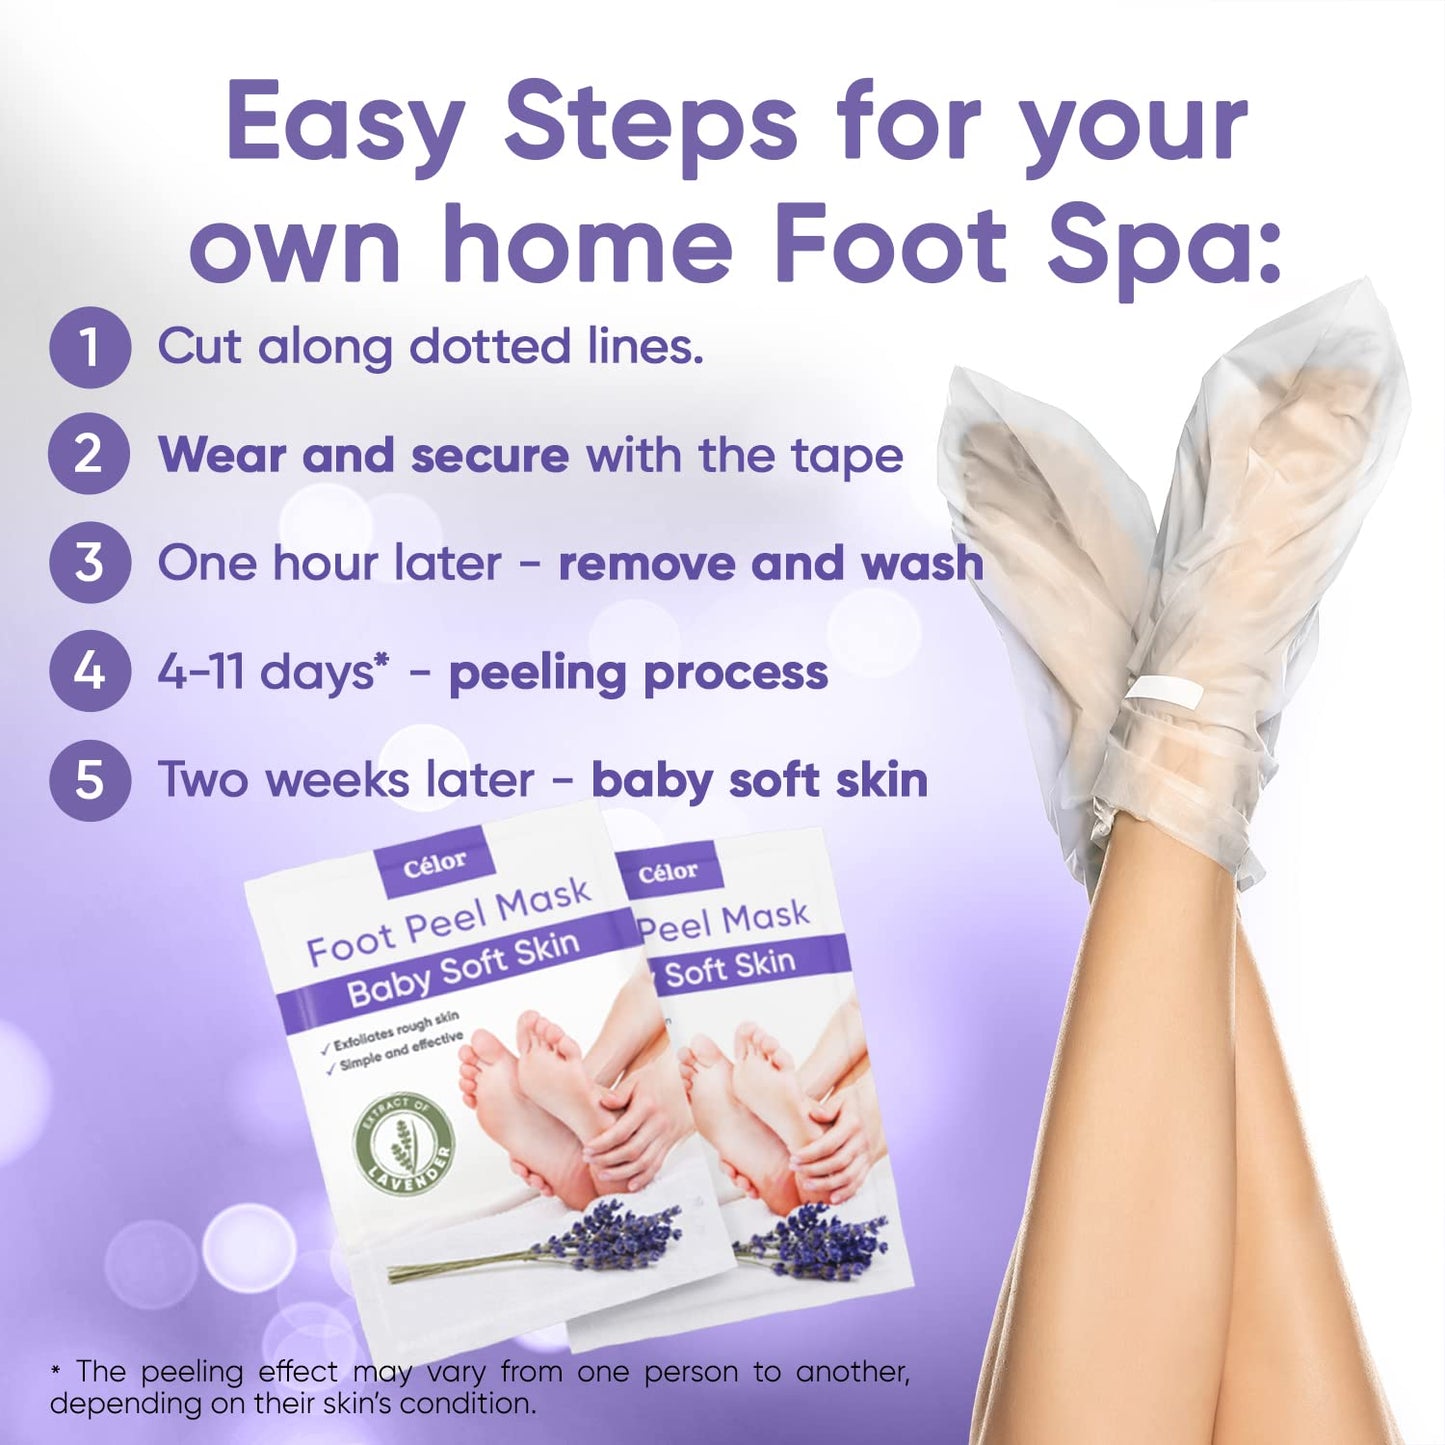 Foot Peel Mask (2 Pairs) - for Baby Soft Skin Remove Dead Skin, Dry, Cracked Feet & Callus, Spa, Made with Aloe Vera Extract Women and Men Peeling Exfoliating, Lavender